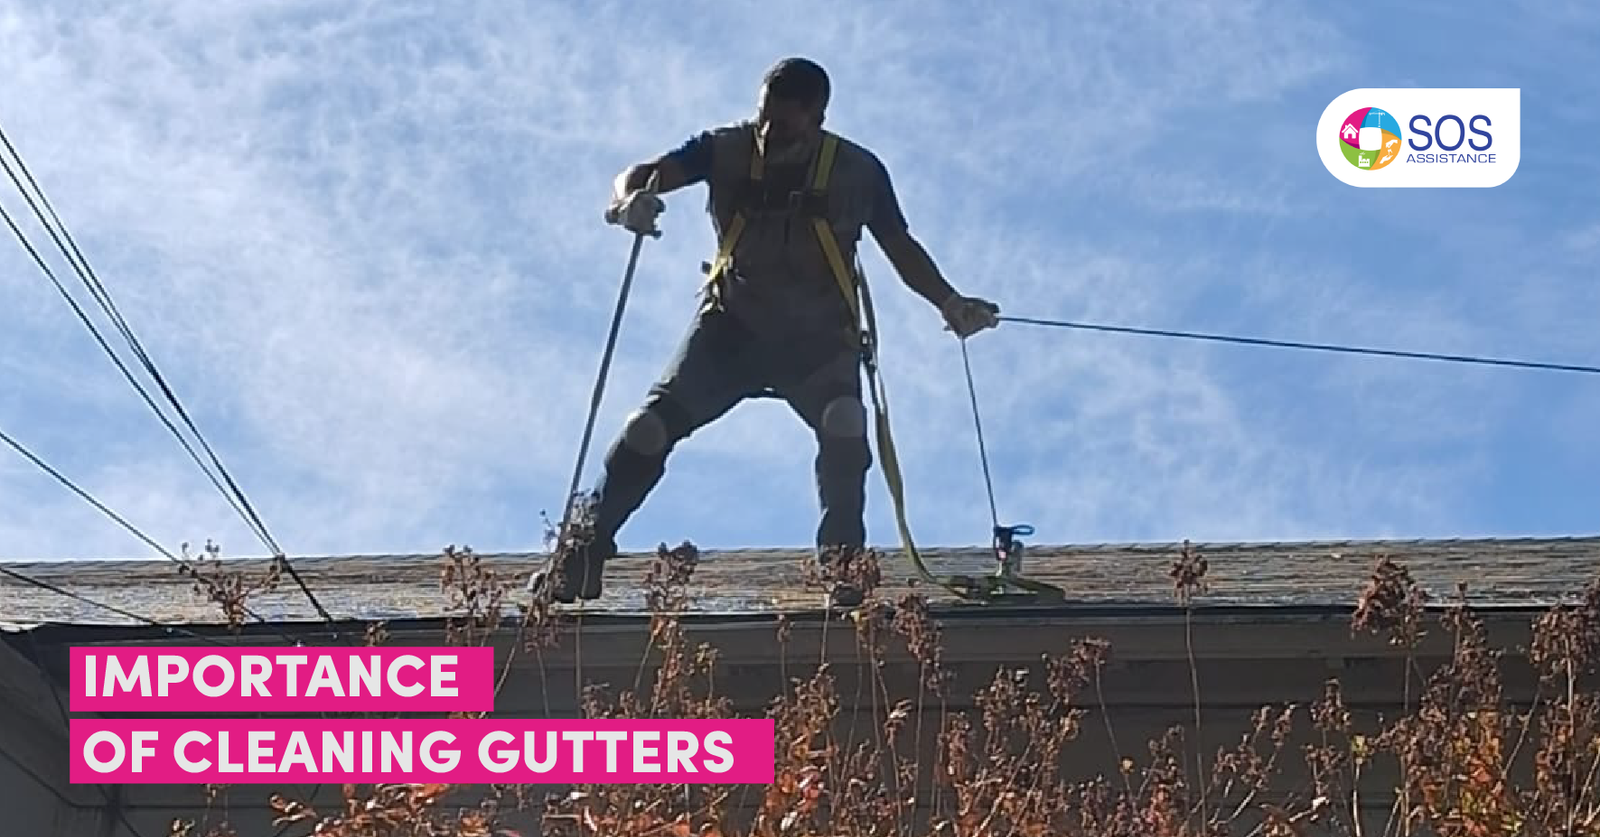 IMPORTANCE OF CLEANING GUTTERS